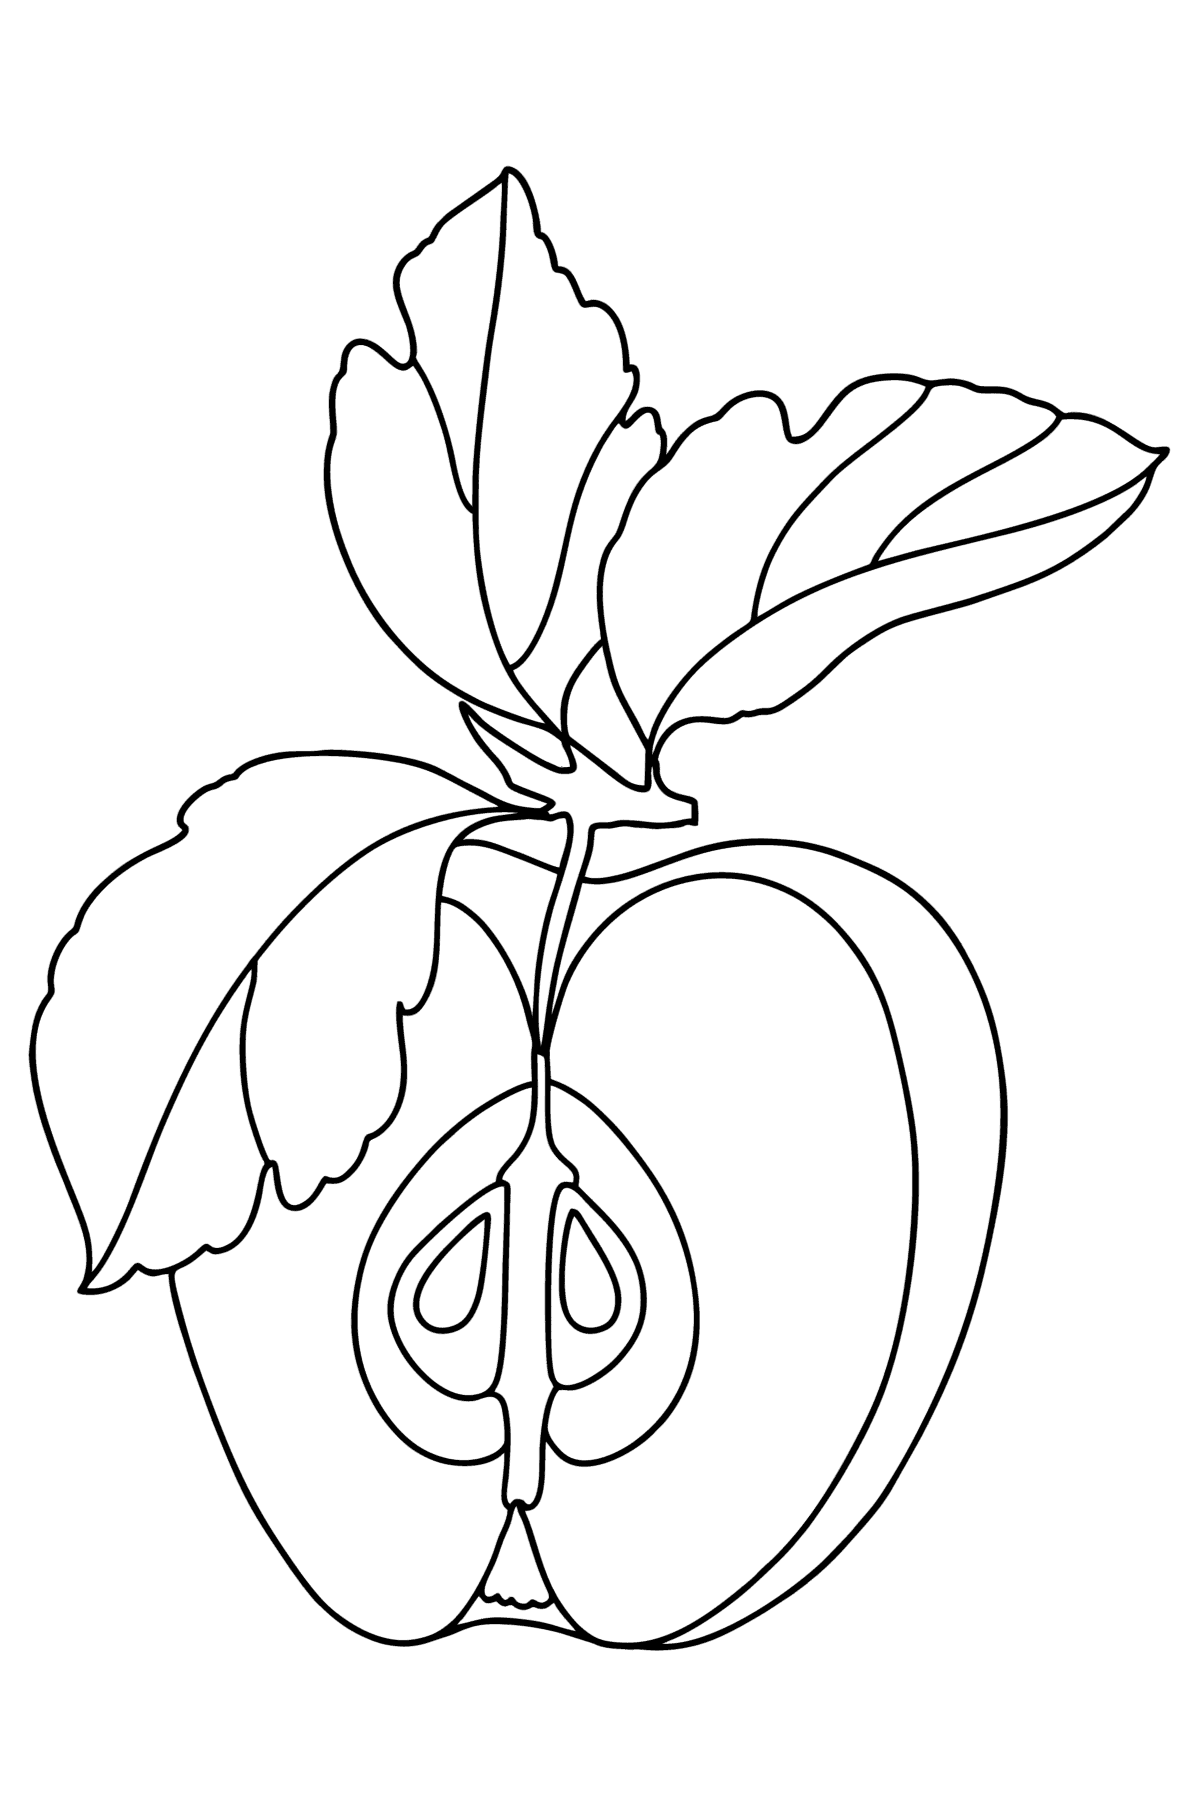 Half an apple сoloring page - Coloring Pages for Kids